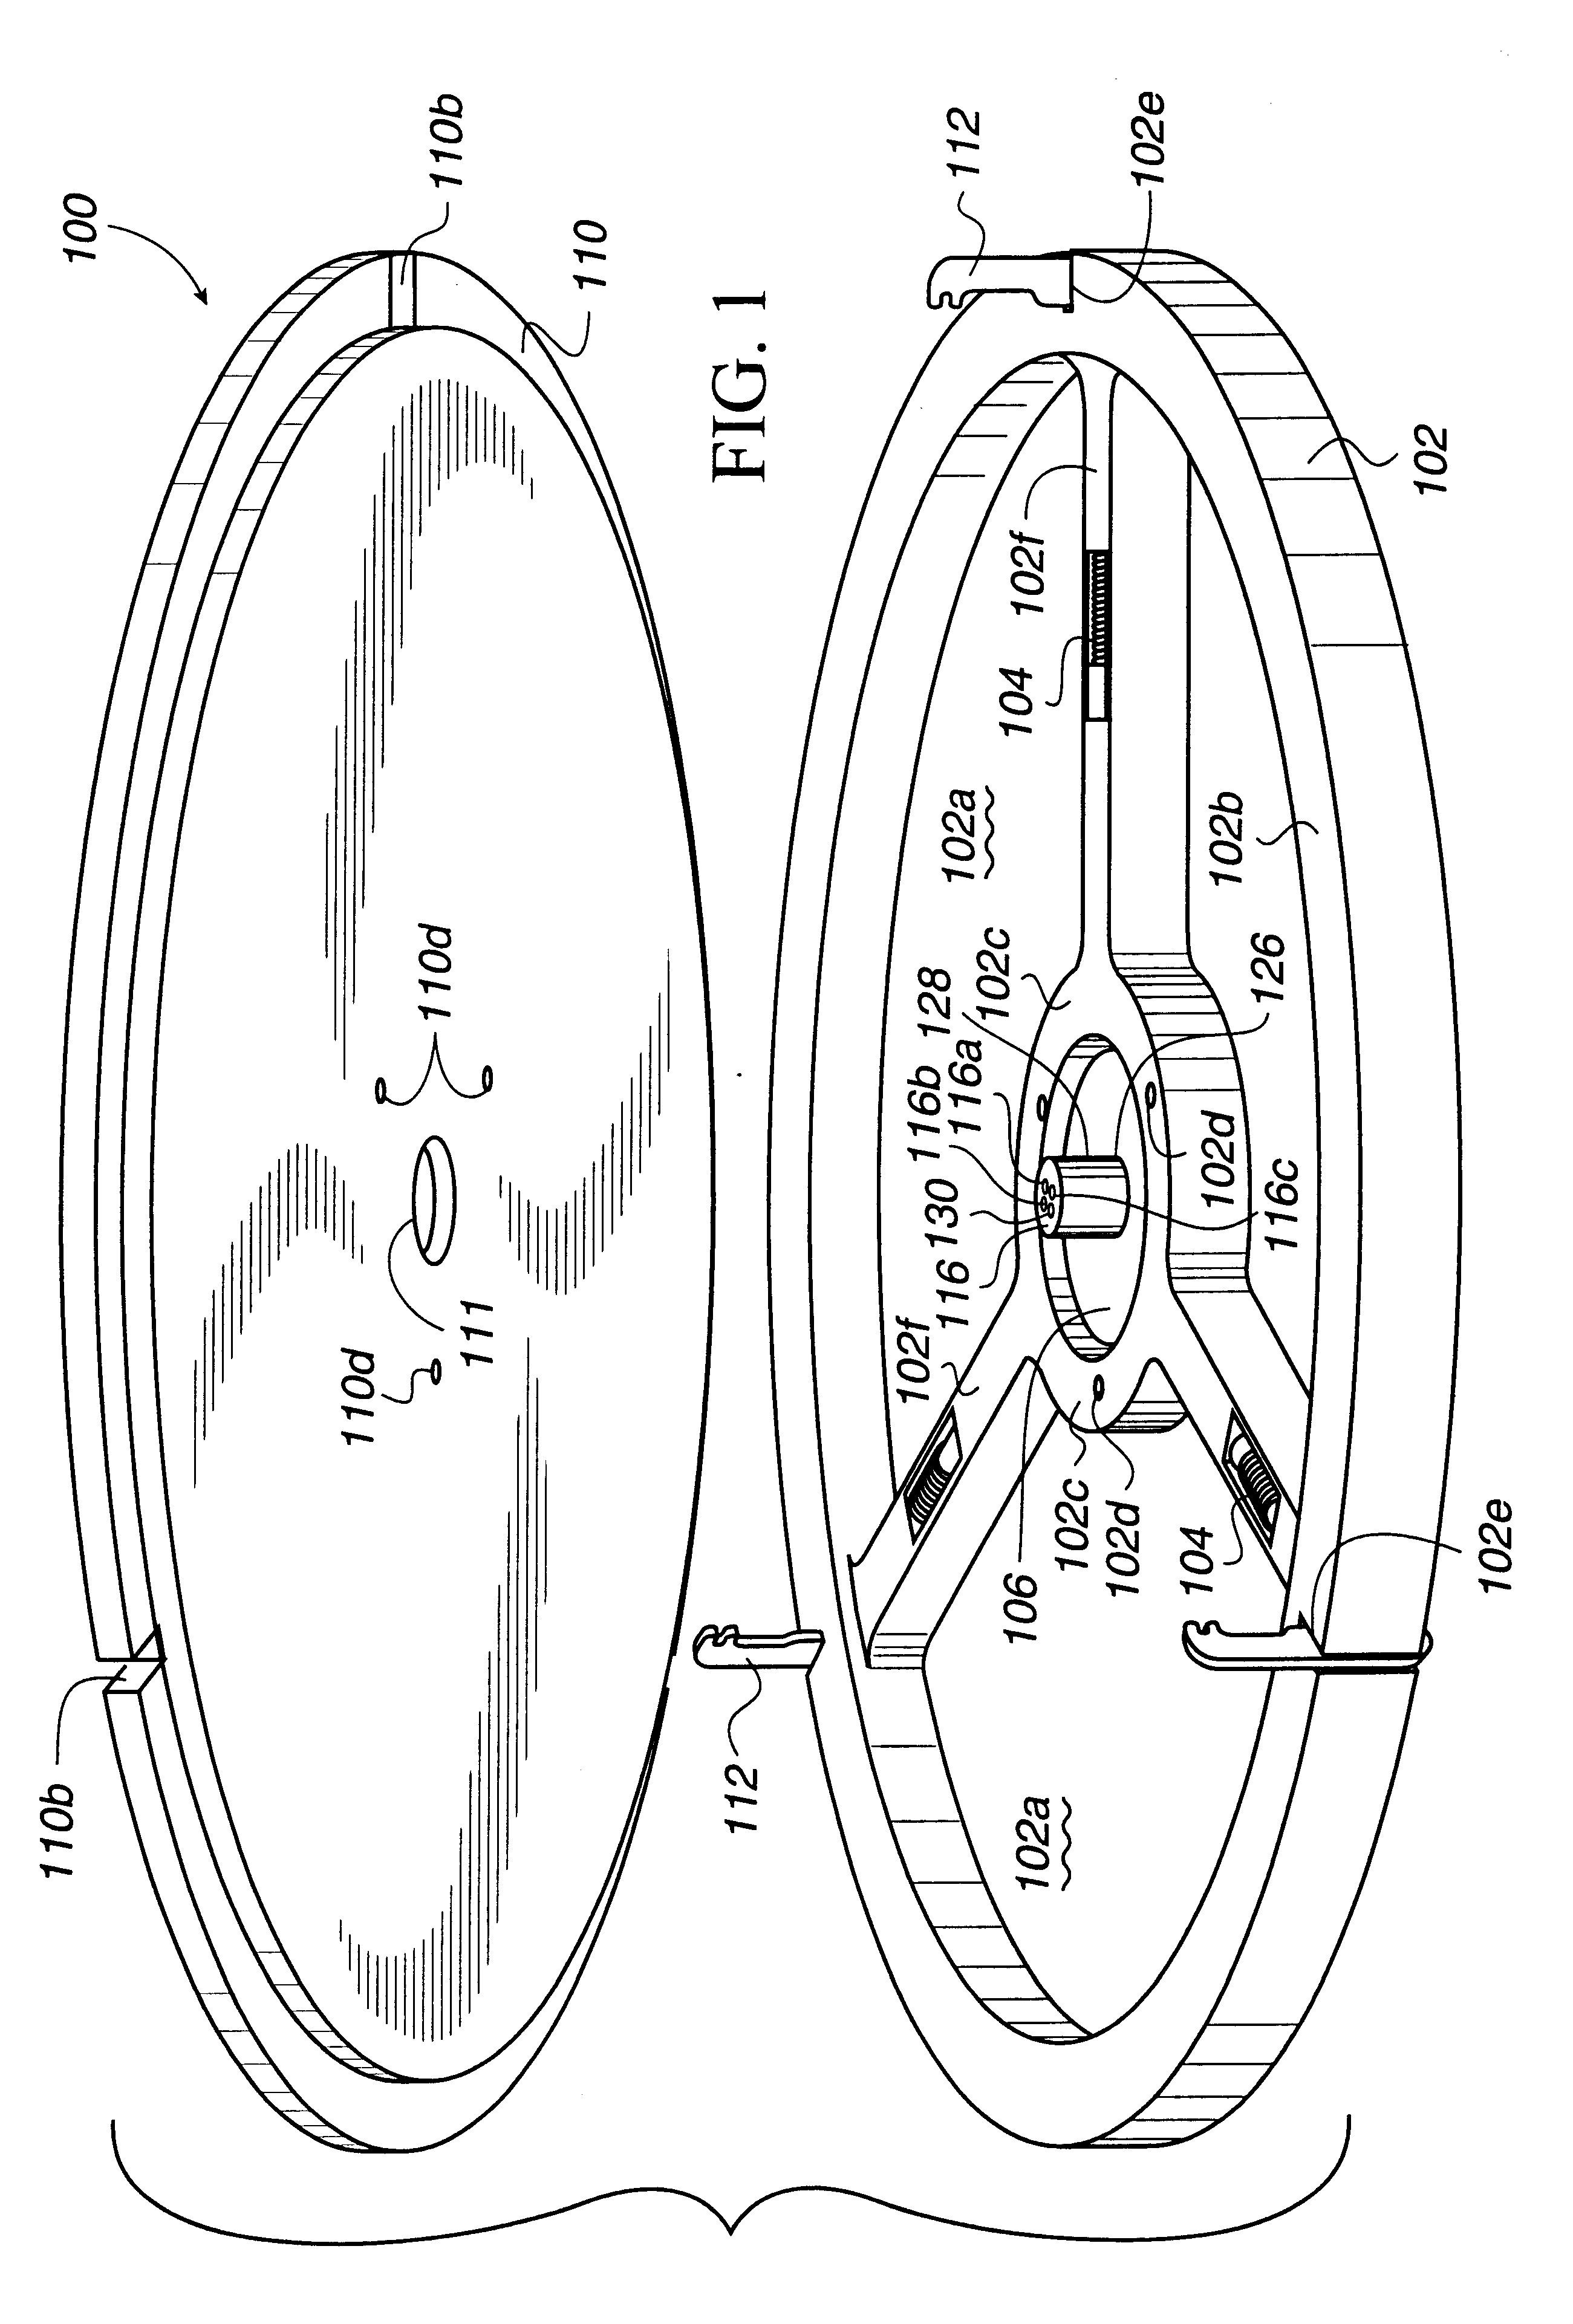 Chuck assembly for use in a spin, rinse, and dry module and methods for making and implementing the same